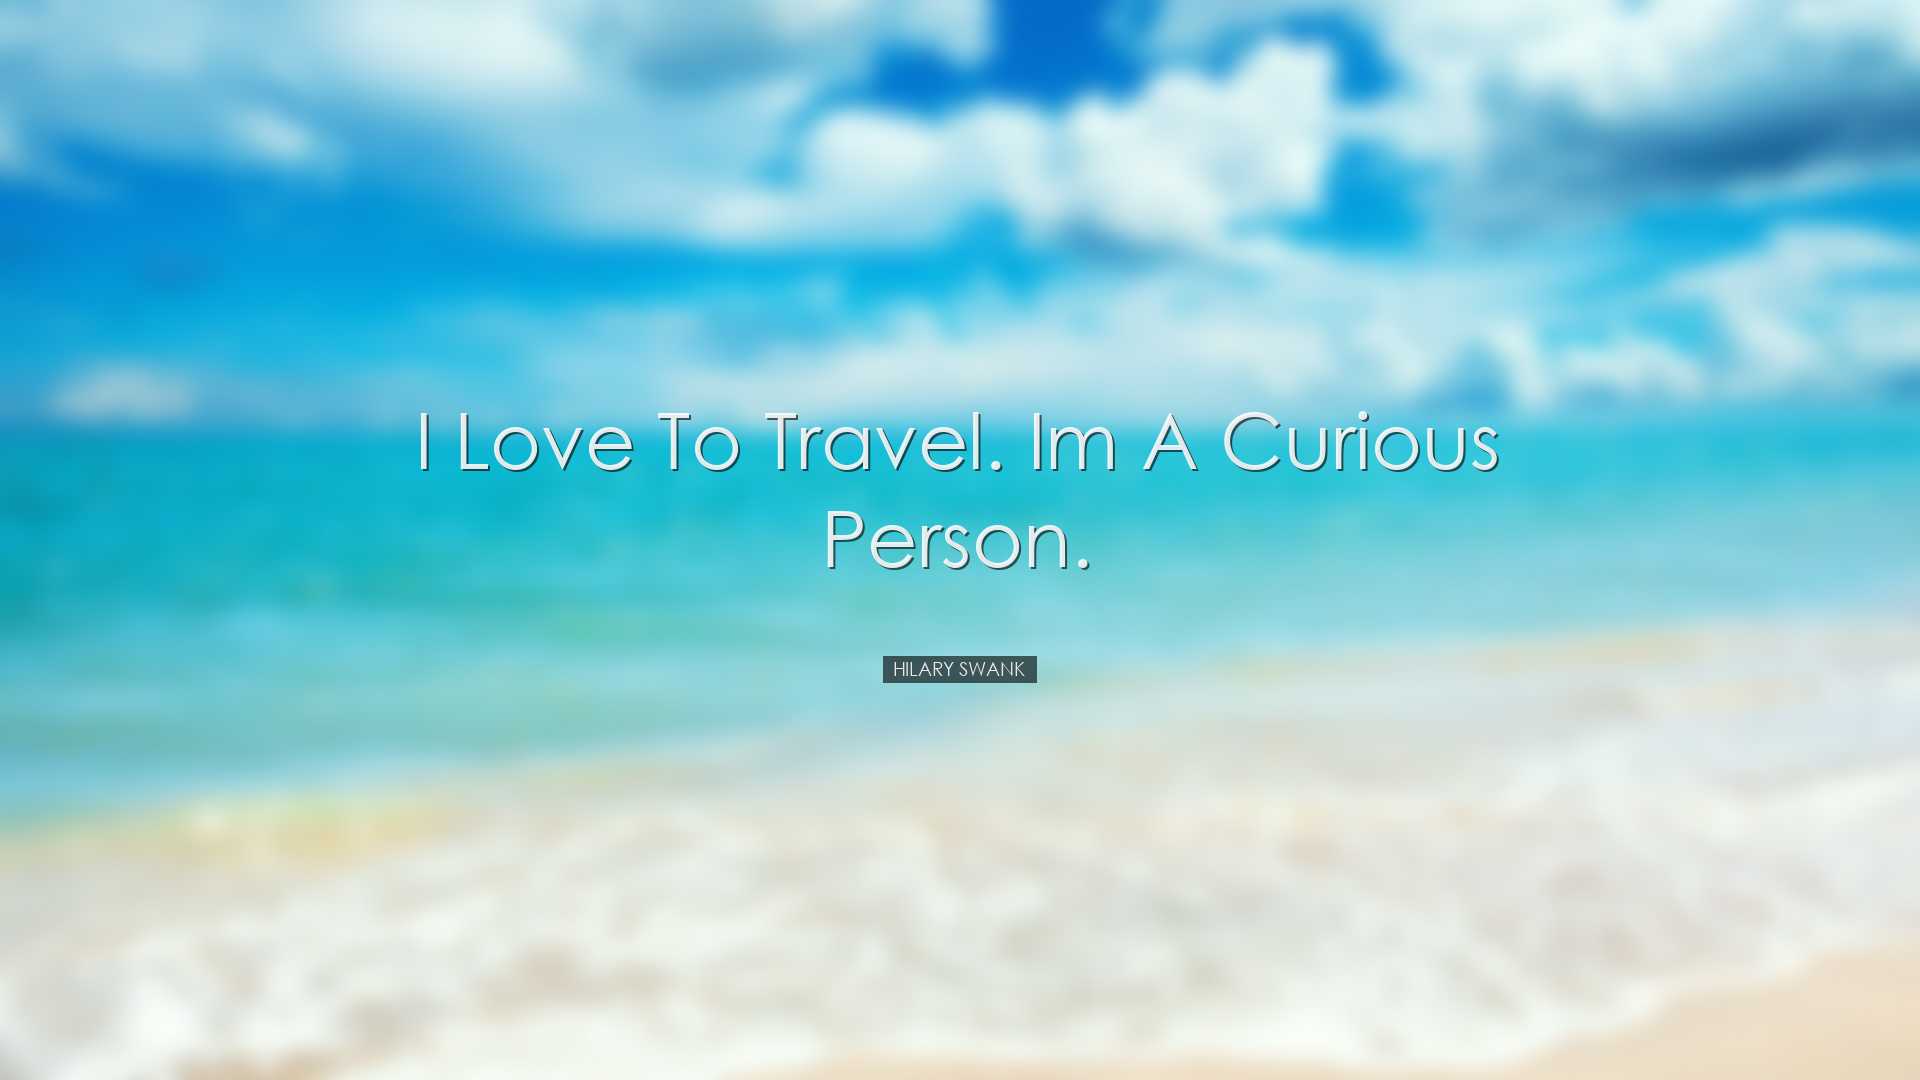 I love to travel. Im a curious person. - Hilary Swank